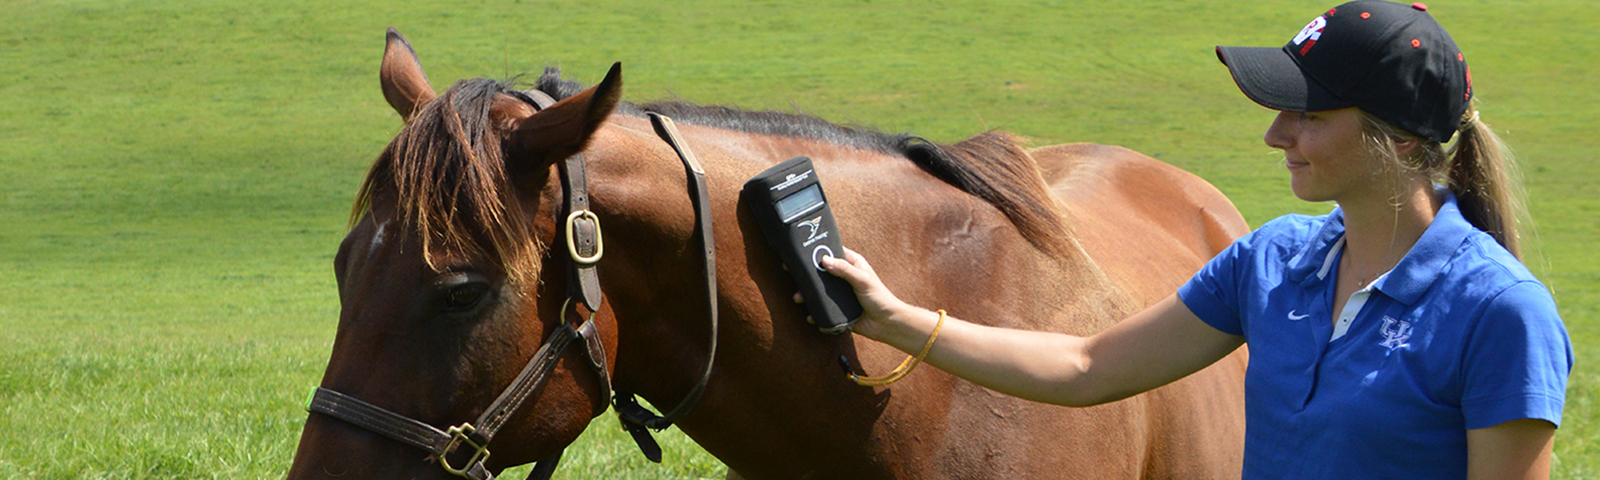 horse owner using a hand reader to check a horses microchip and vital signs